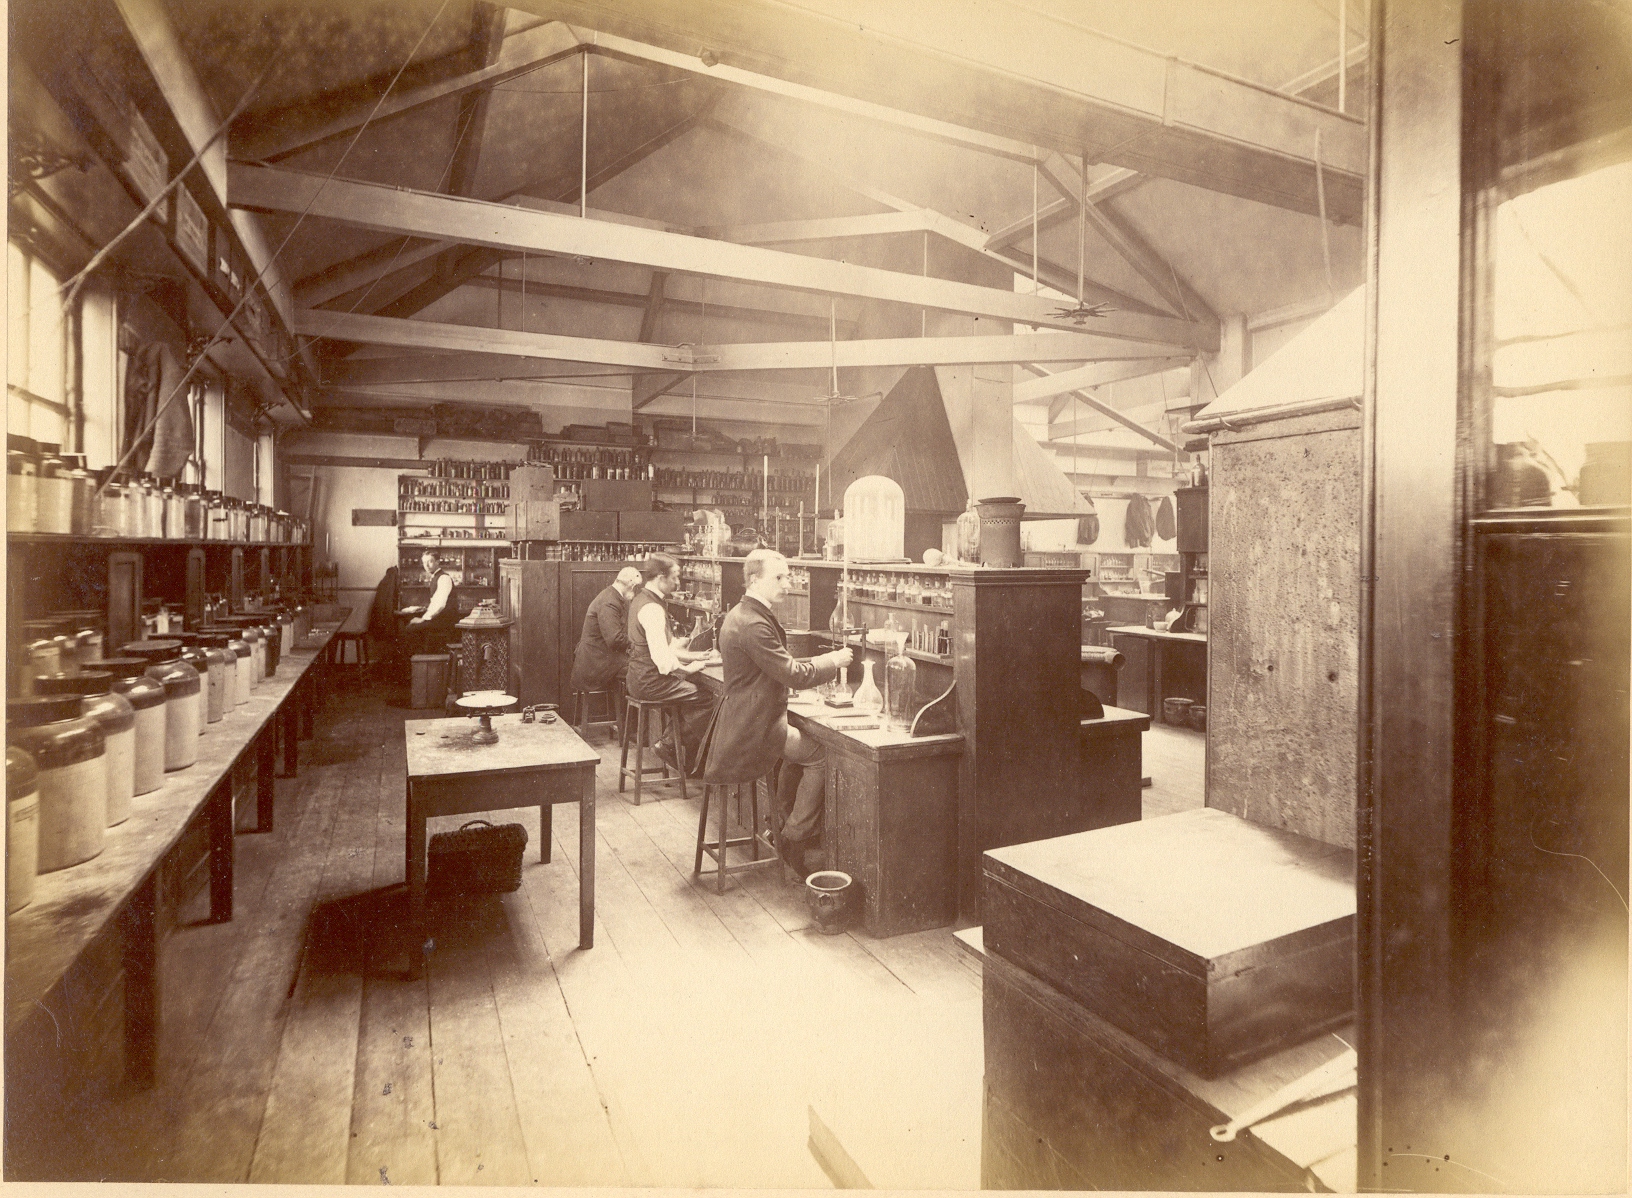 Chemical Laboratory at the School of Pharmacy in 1883 Rose Minshull fought to have access to this laboratory as part of her rejected application to be a registered student ten years earlier